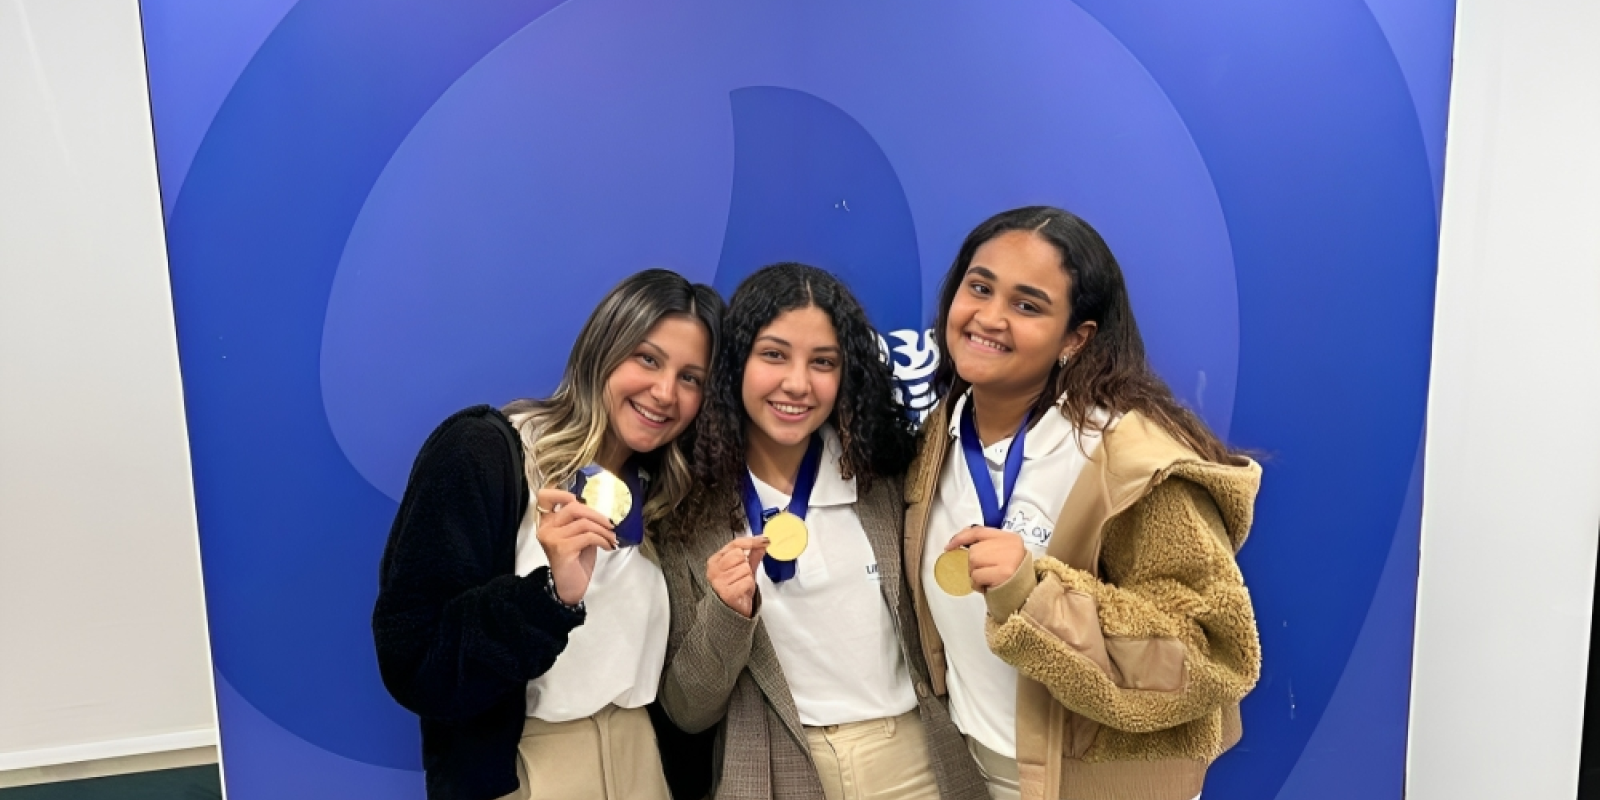 Three girls smiling wearing gold medals